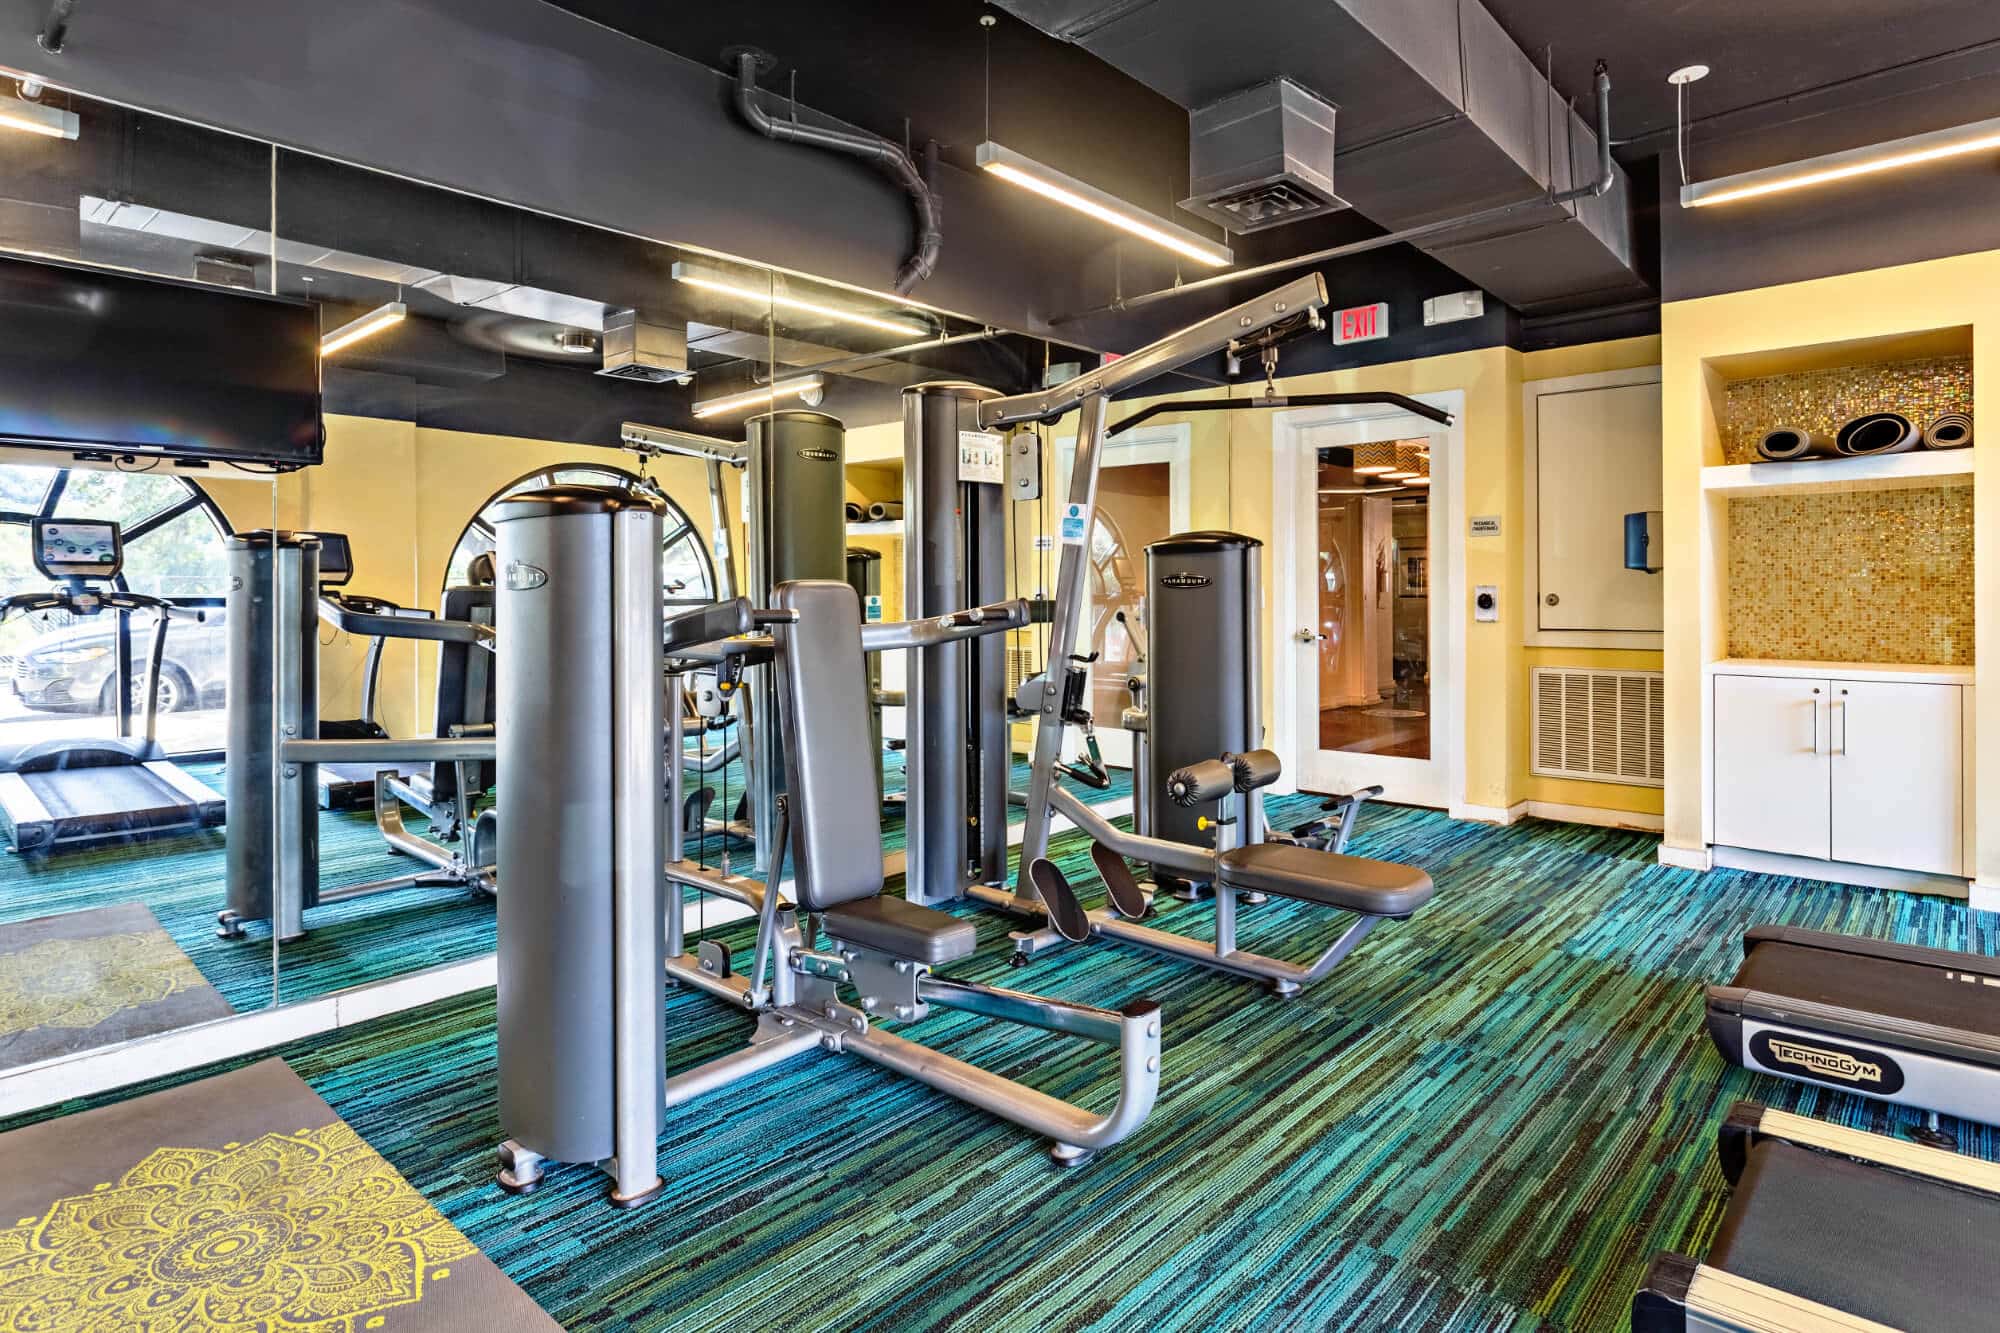 axis west campus off campus apartments in west campus near ut austin resident clubhouse fitness center machines